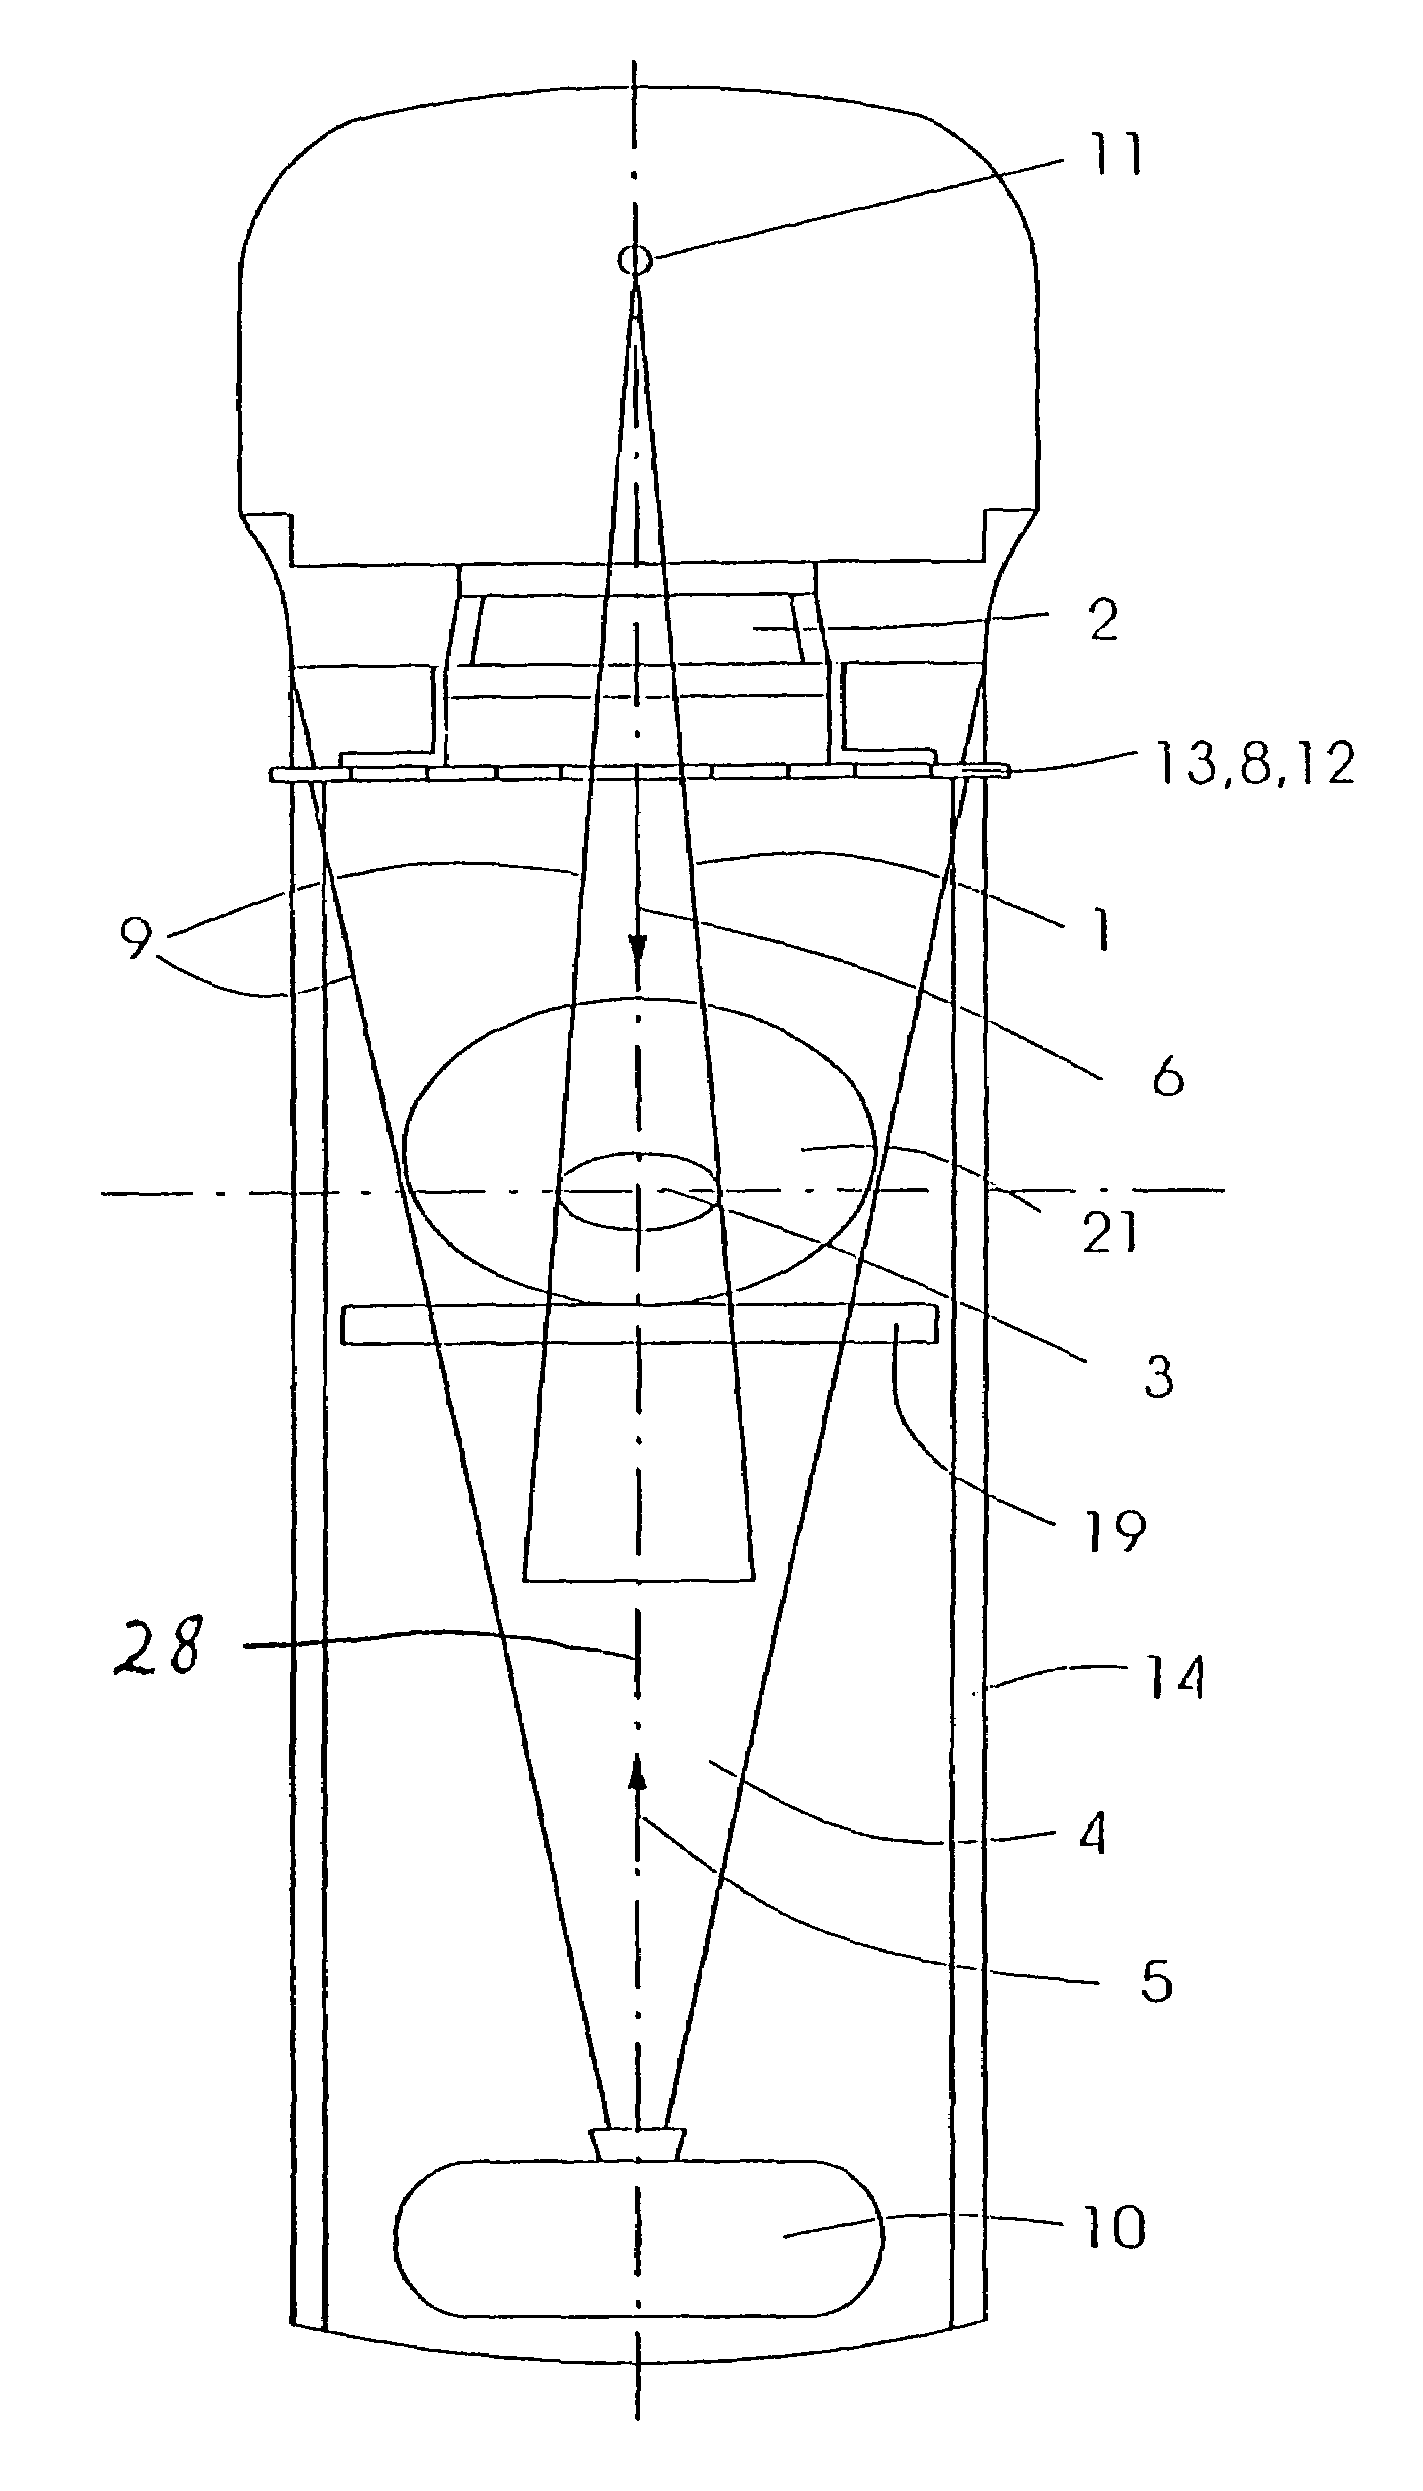 Device for performing and verifying a therapeutic treatment and corresponding computer program and control method